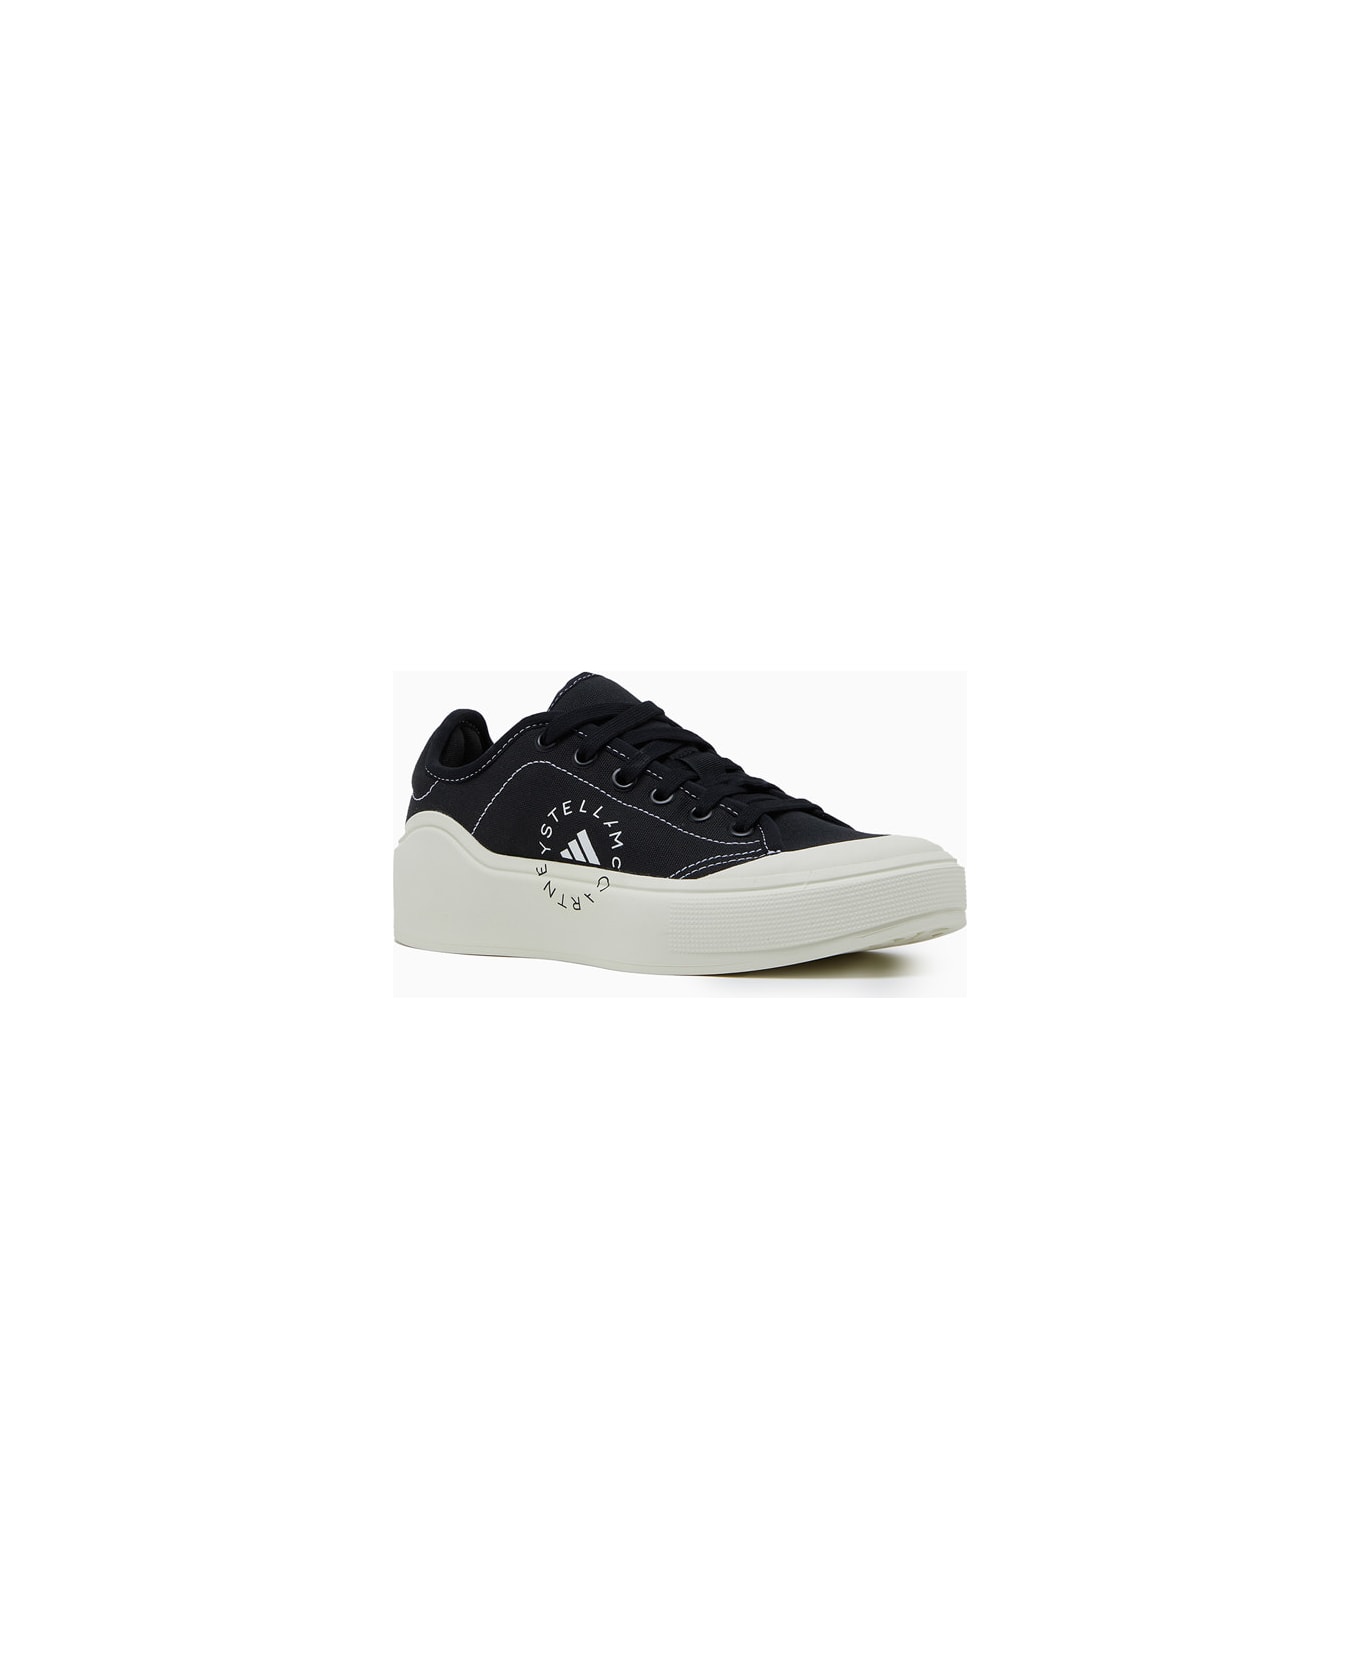 Adidas by Stella McCartney Court Cotton Sneakers Hp5702 スニーカー